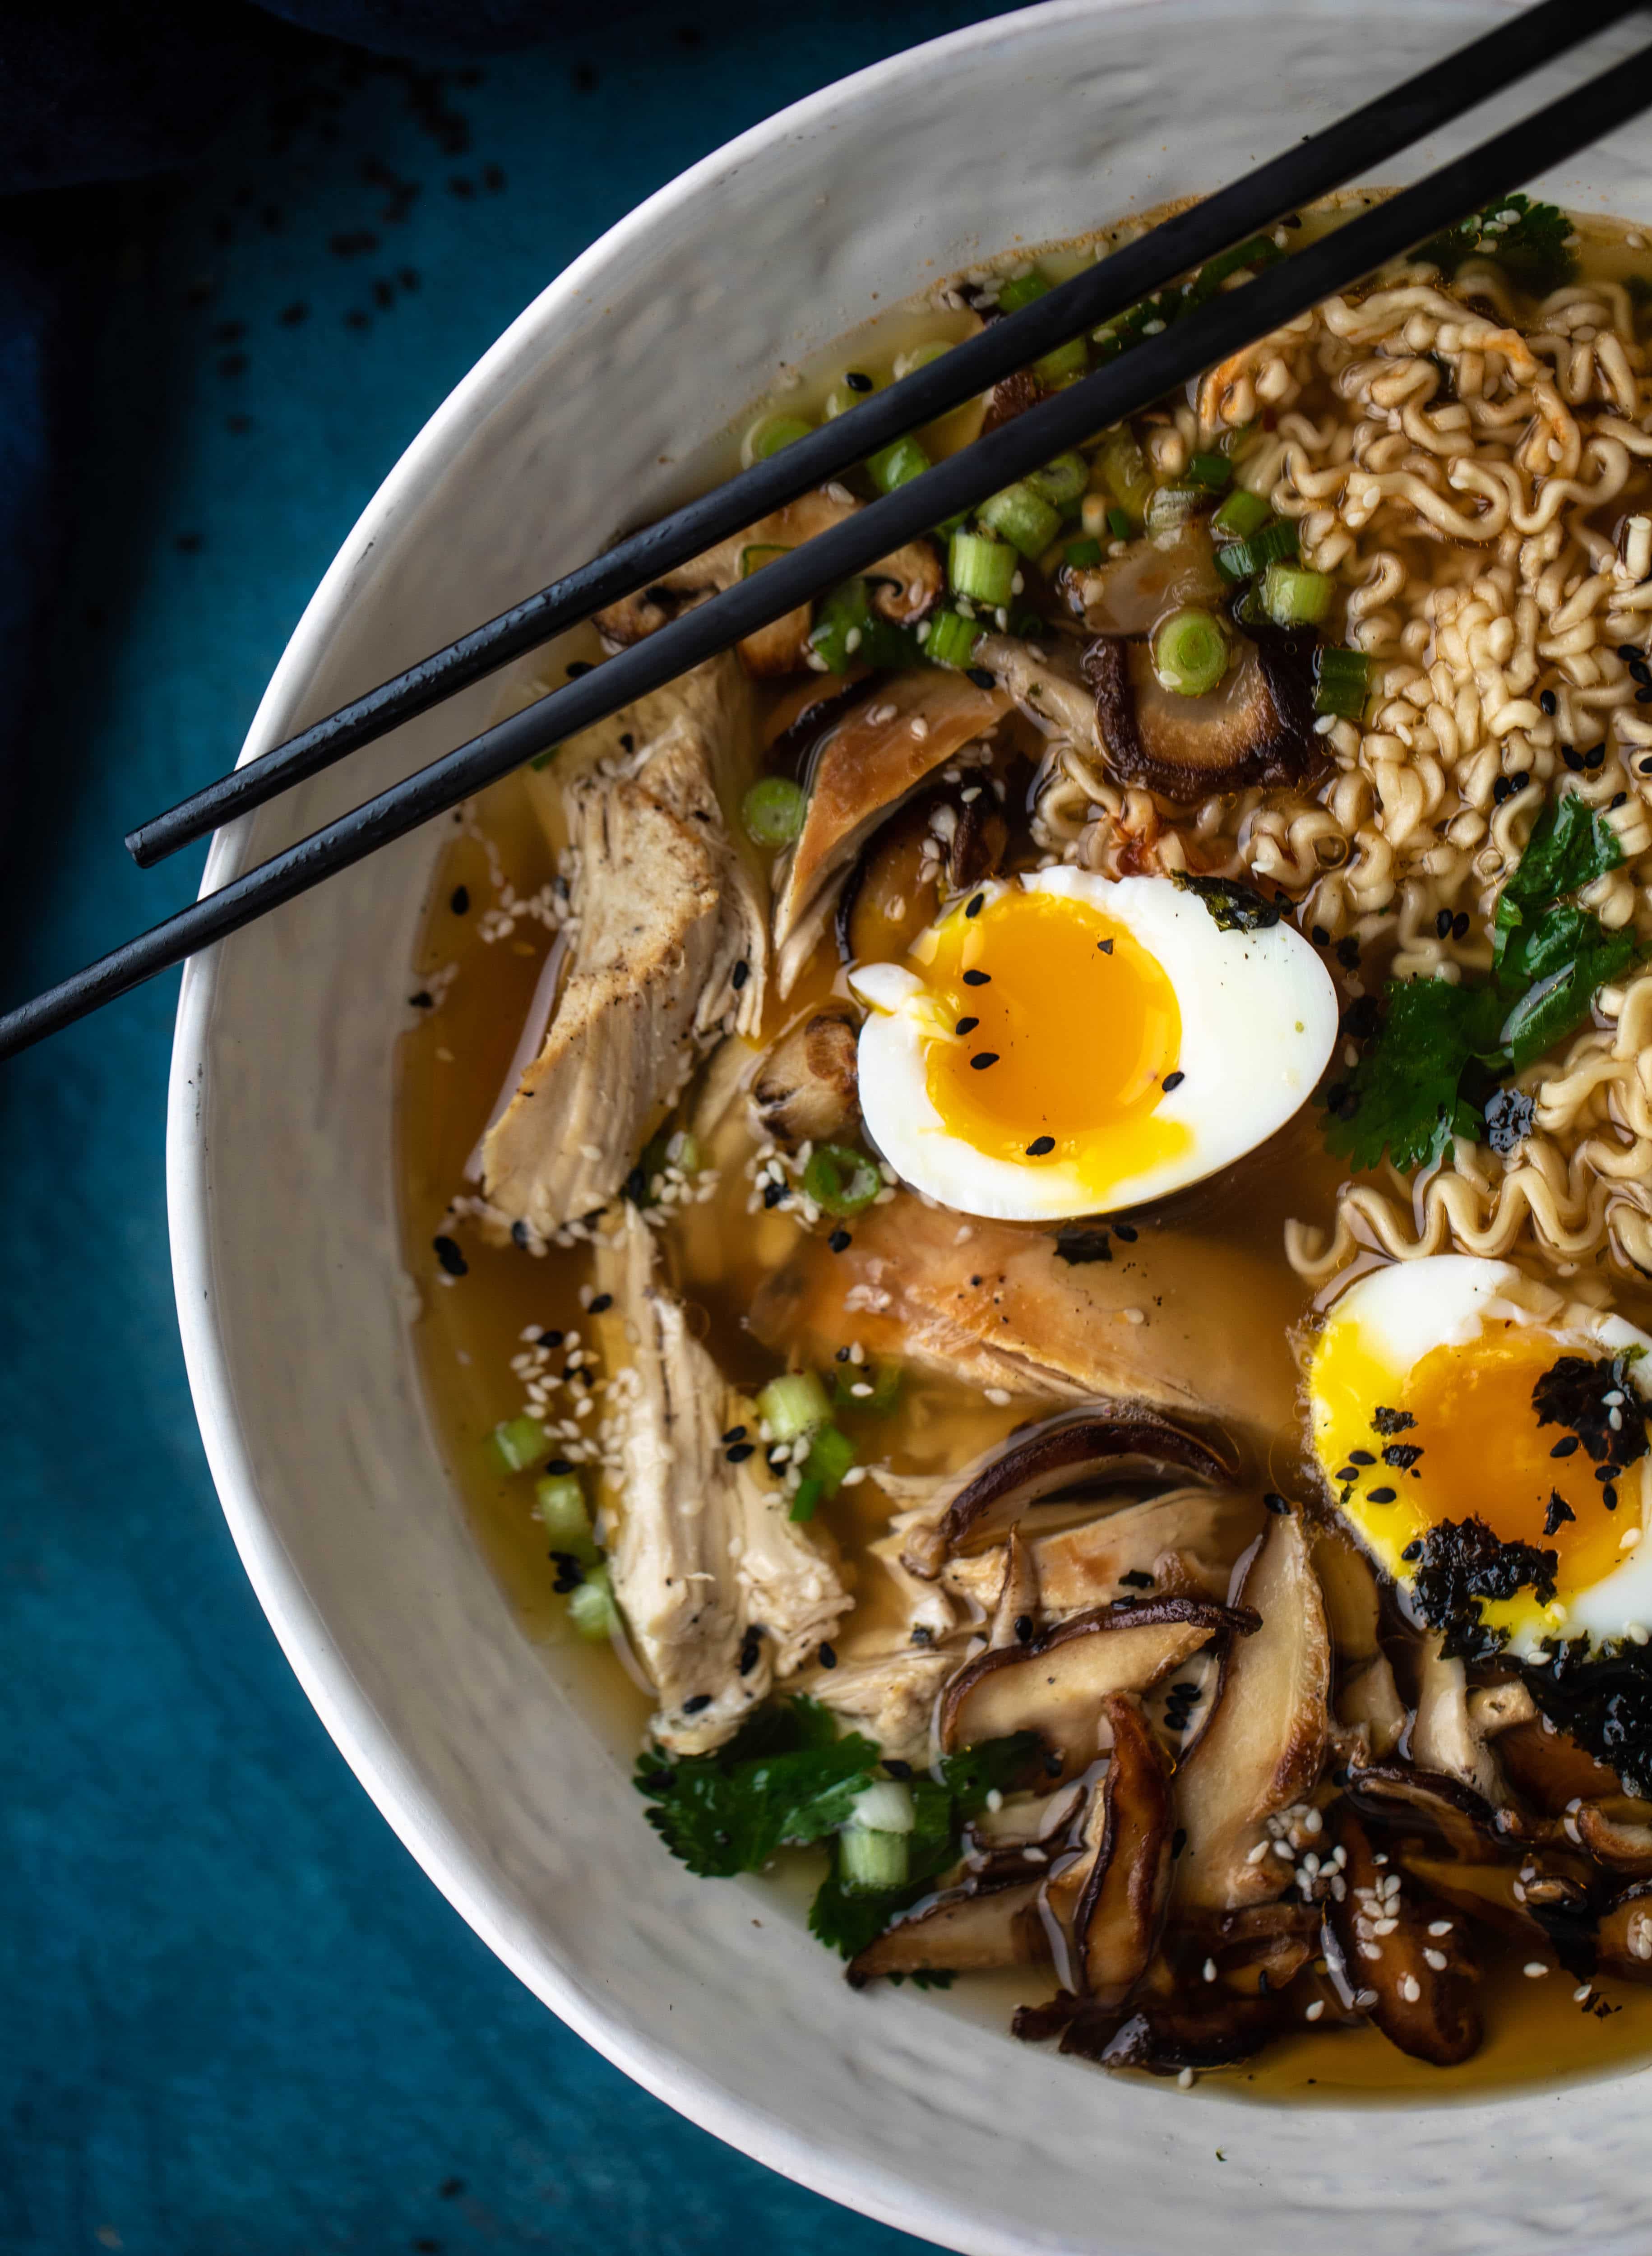 This roasted turkey ramen recipe is made with delish leftover Thanksgiving turkey, ramen noodles, a savory broth and soft boiled eggs!